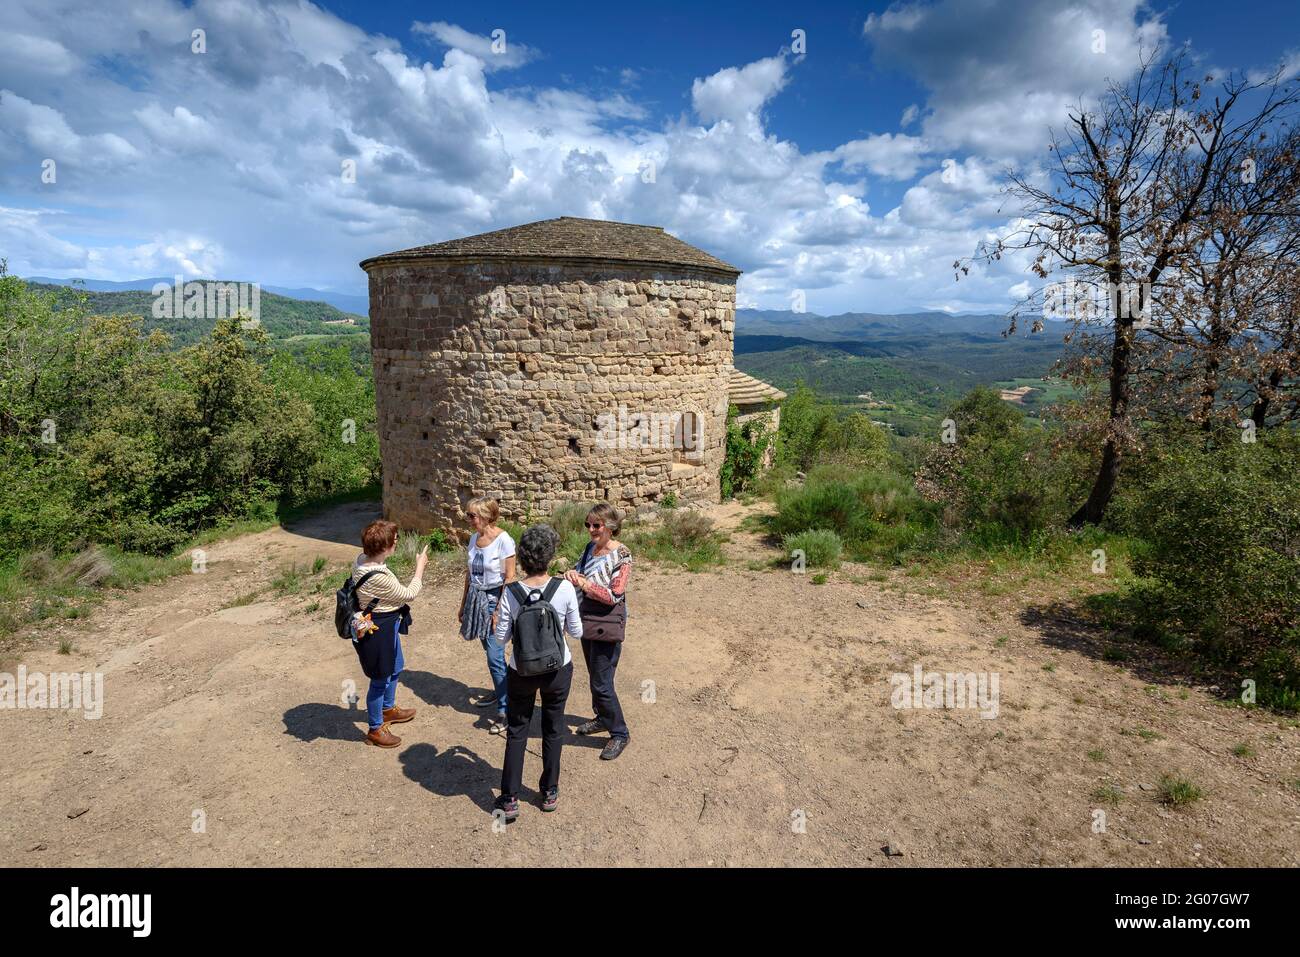 Views from the hill of the Lluçà castle with the Sant Vicenç de Lluçà hermitage in the foreground (Osona, Barcelona, Catalonia, Spain) Stock Photo